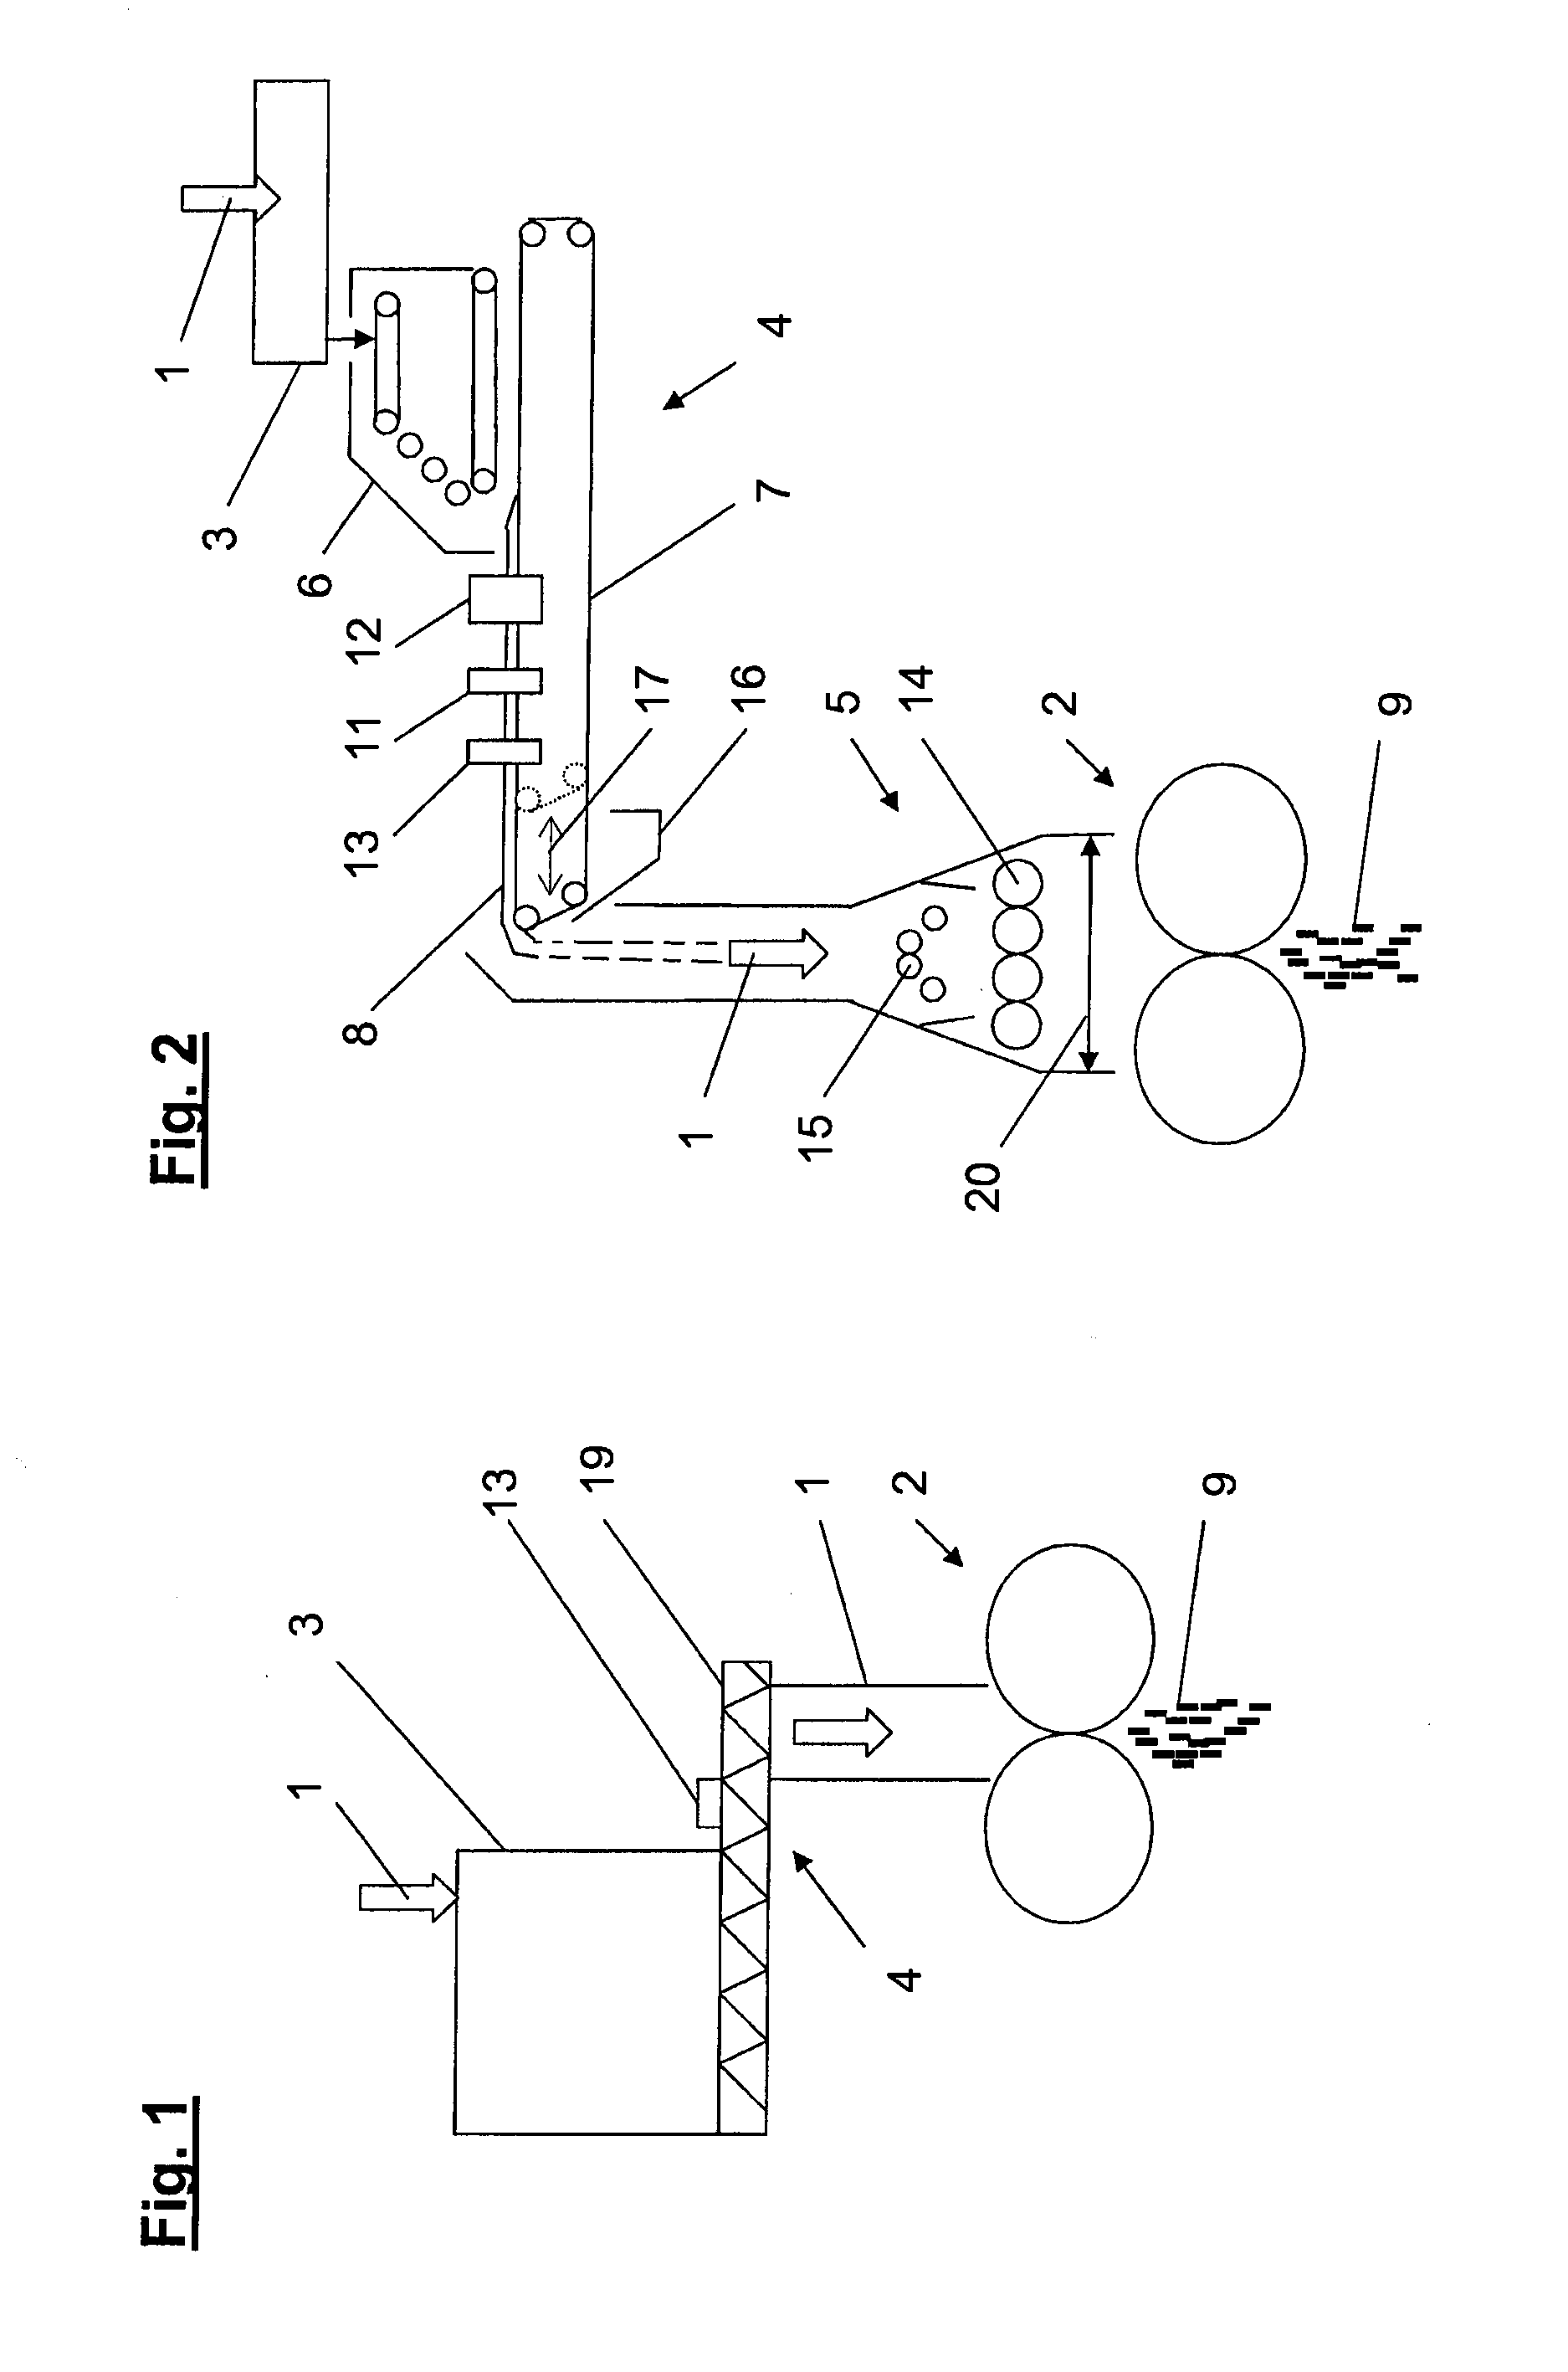 Method and Installation for the Production of Pellets from Biomass in a Pelletizing Press for Use as Fuel in Furnaces